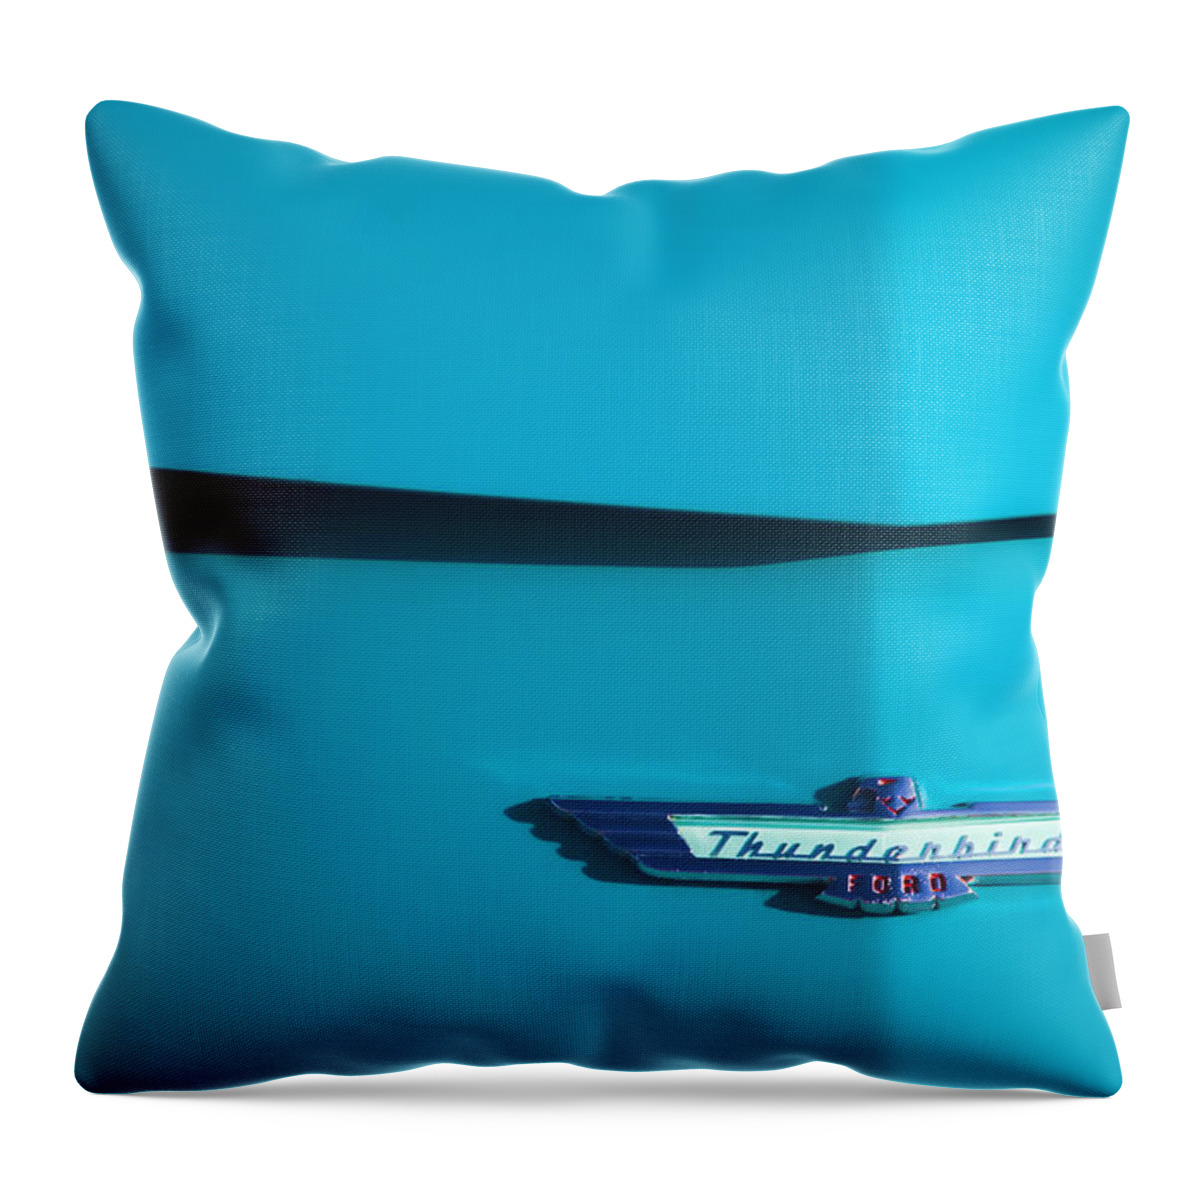 1956 Throw Pillow featuring the photograph 1956 Ford Thunderbird by Carol Leigh